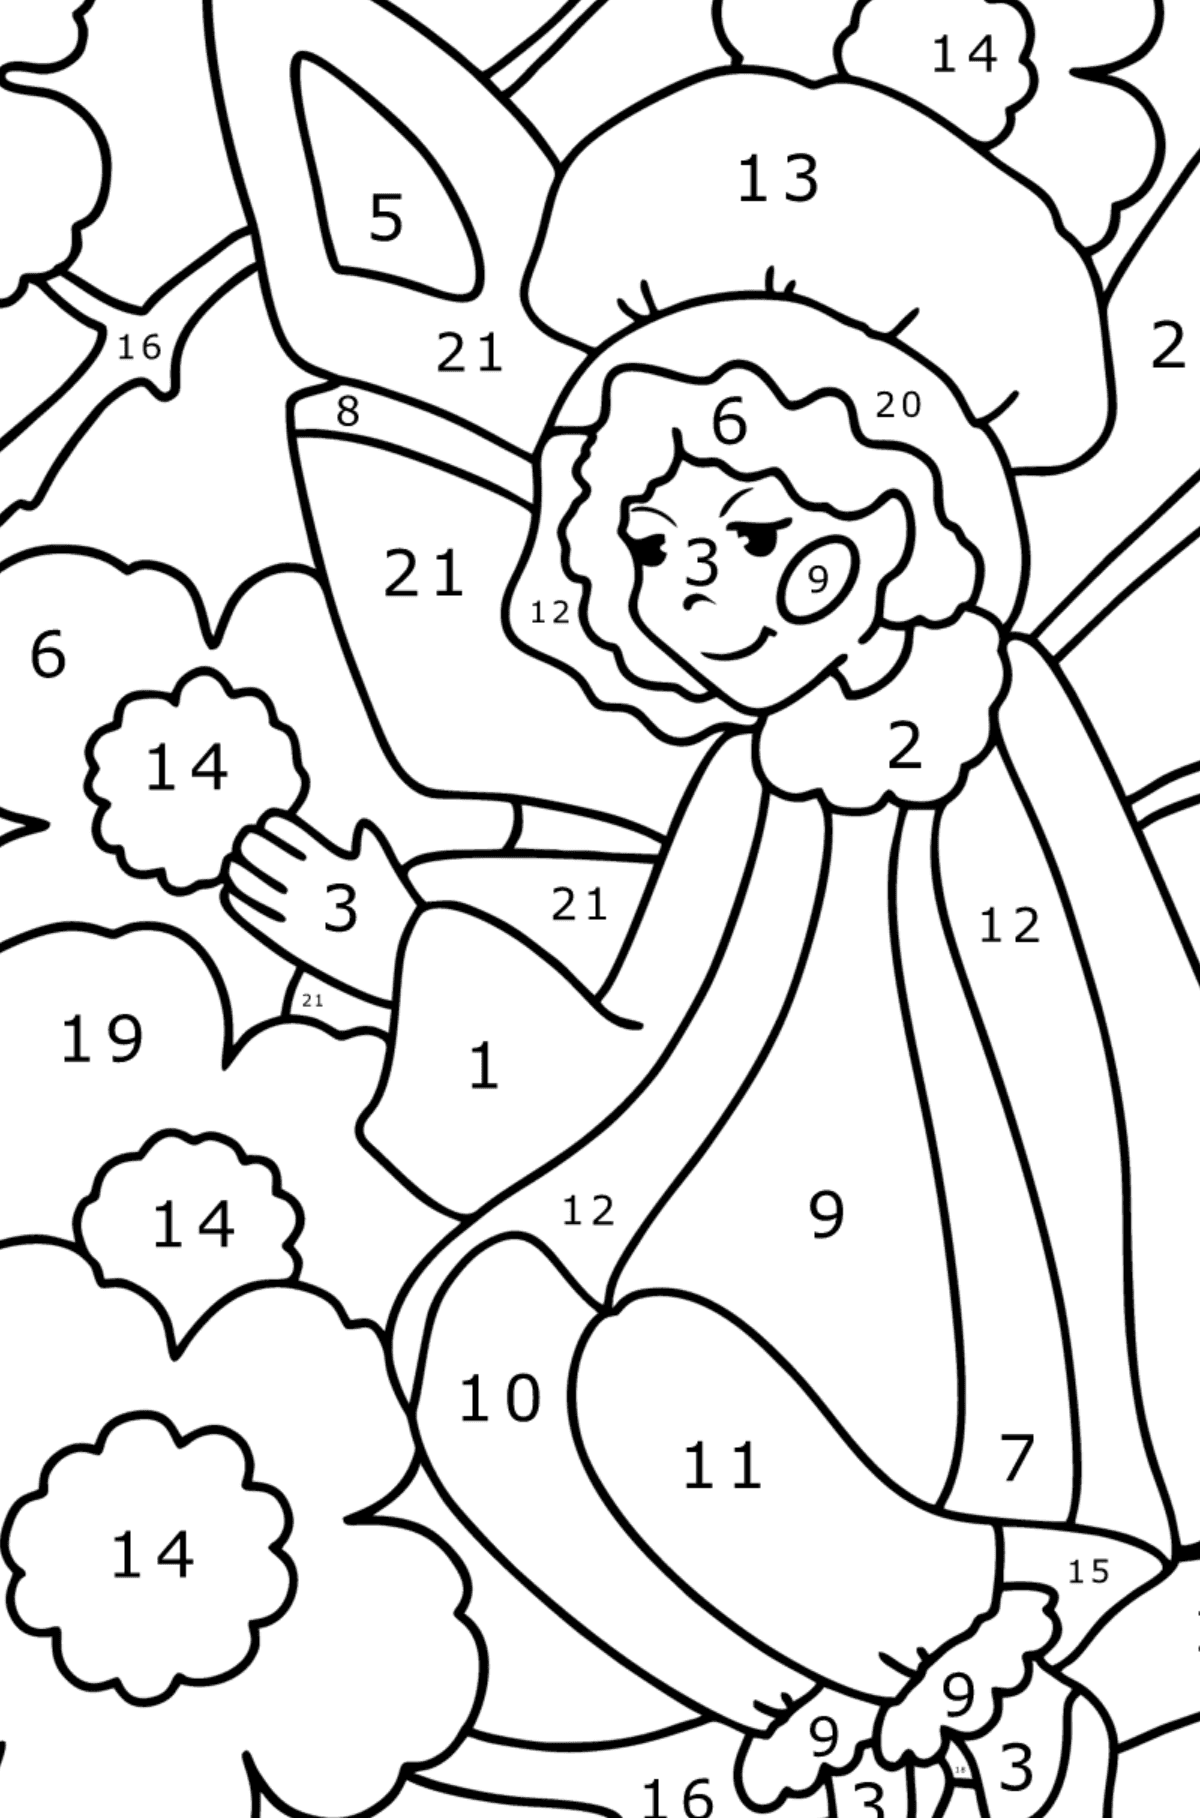 Fairy on a flower coloring page - Coloring by Numbers for Kids